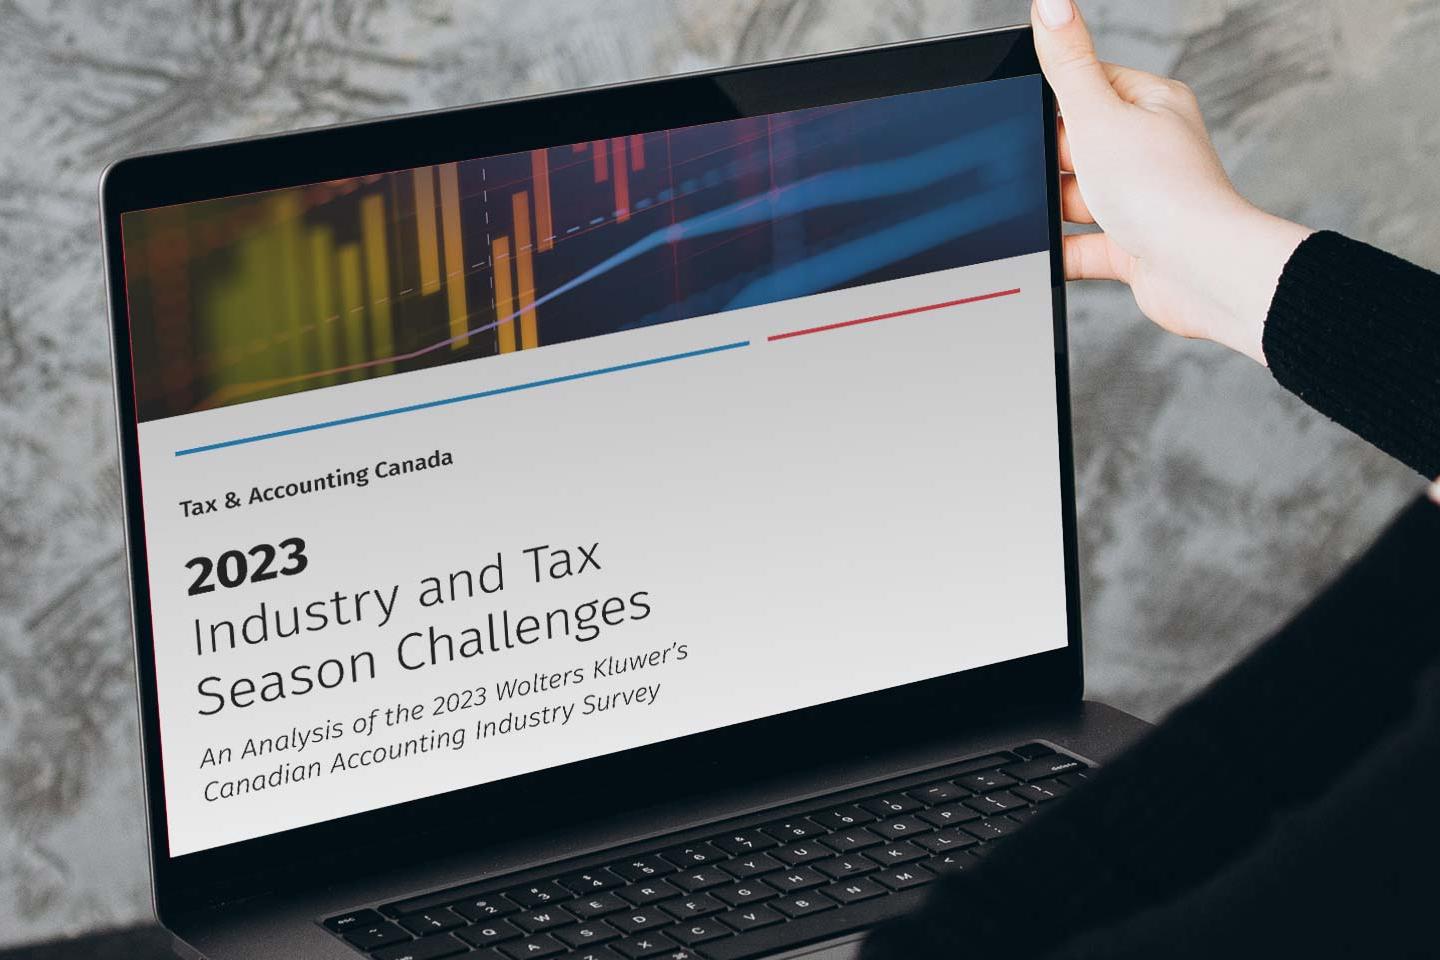 Canadian Industry and Tax Season Challenges Report released: Industry insights discussed